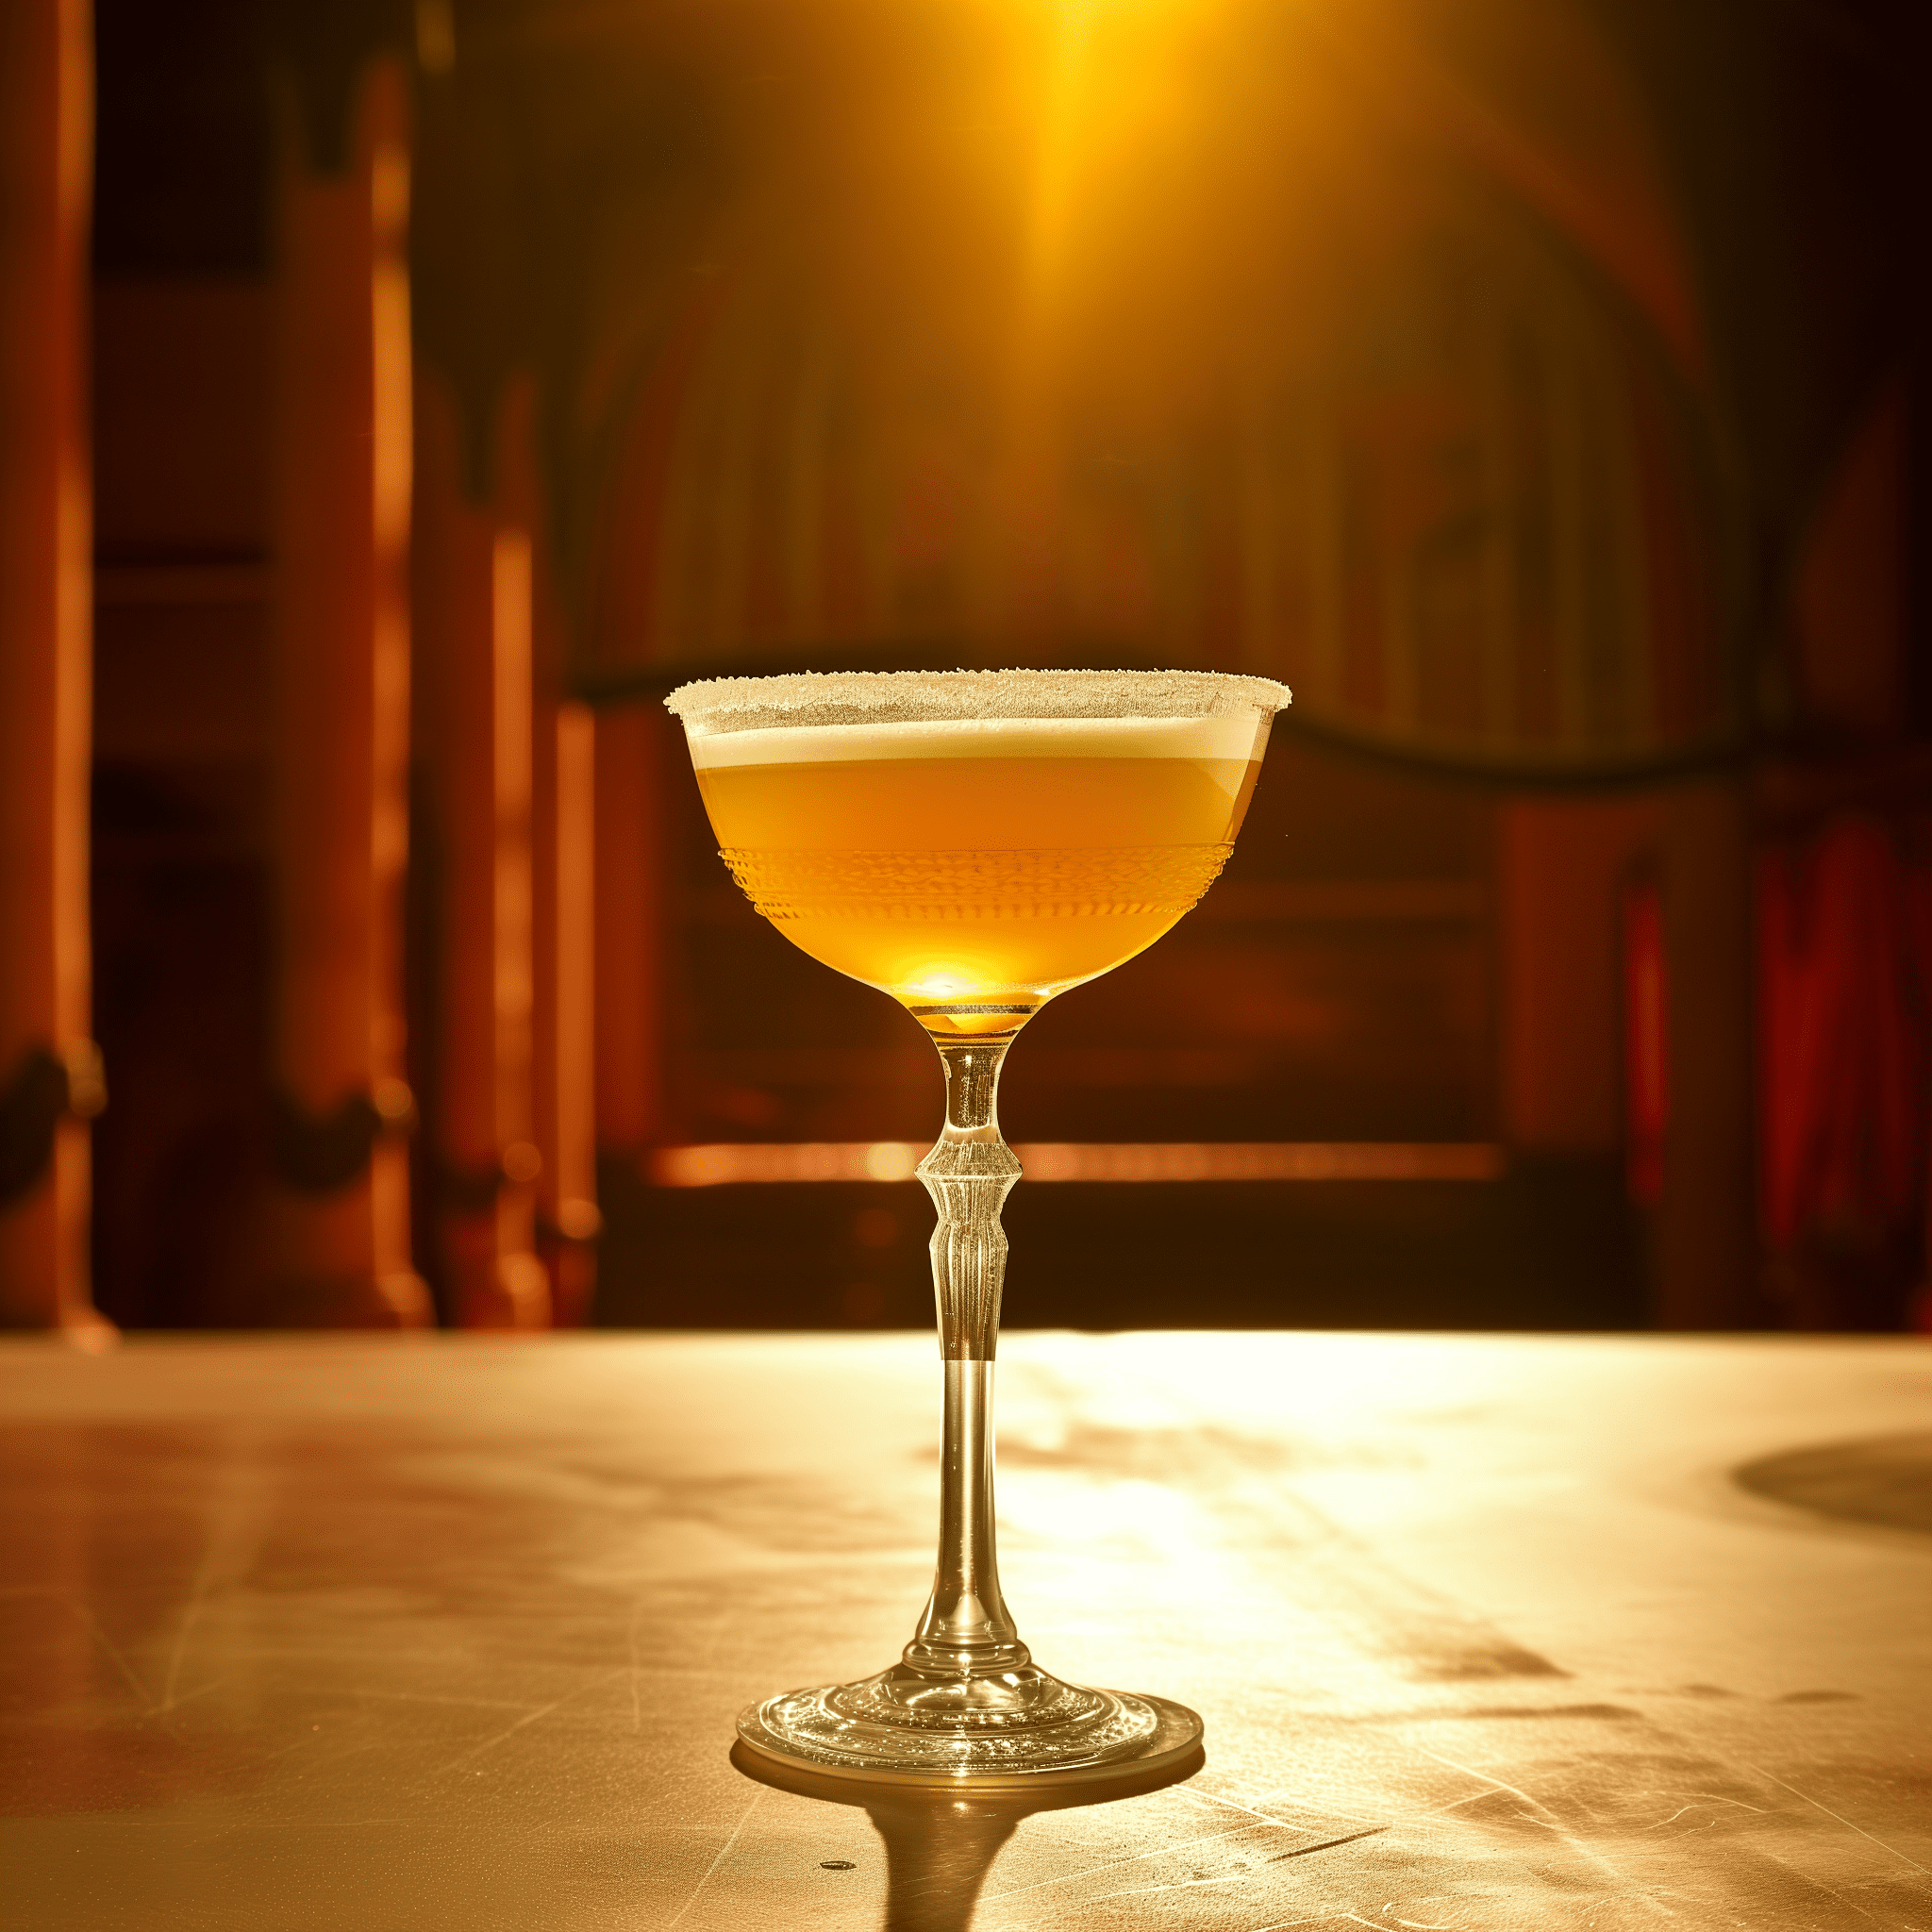 The Toreador is a harmonious blend of sweet and sour, with a robust tequila backbone. The apricot brandy adds a fruity sweetness that complements the sharpness of the lime juice, creating a cocktail that's both refreshing and complex.